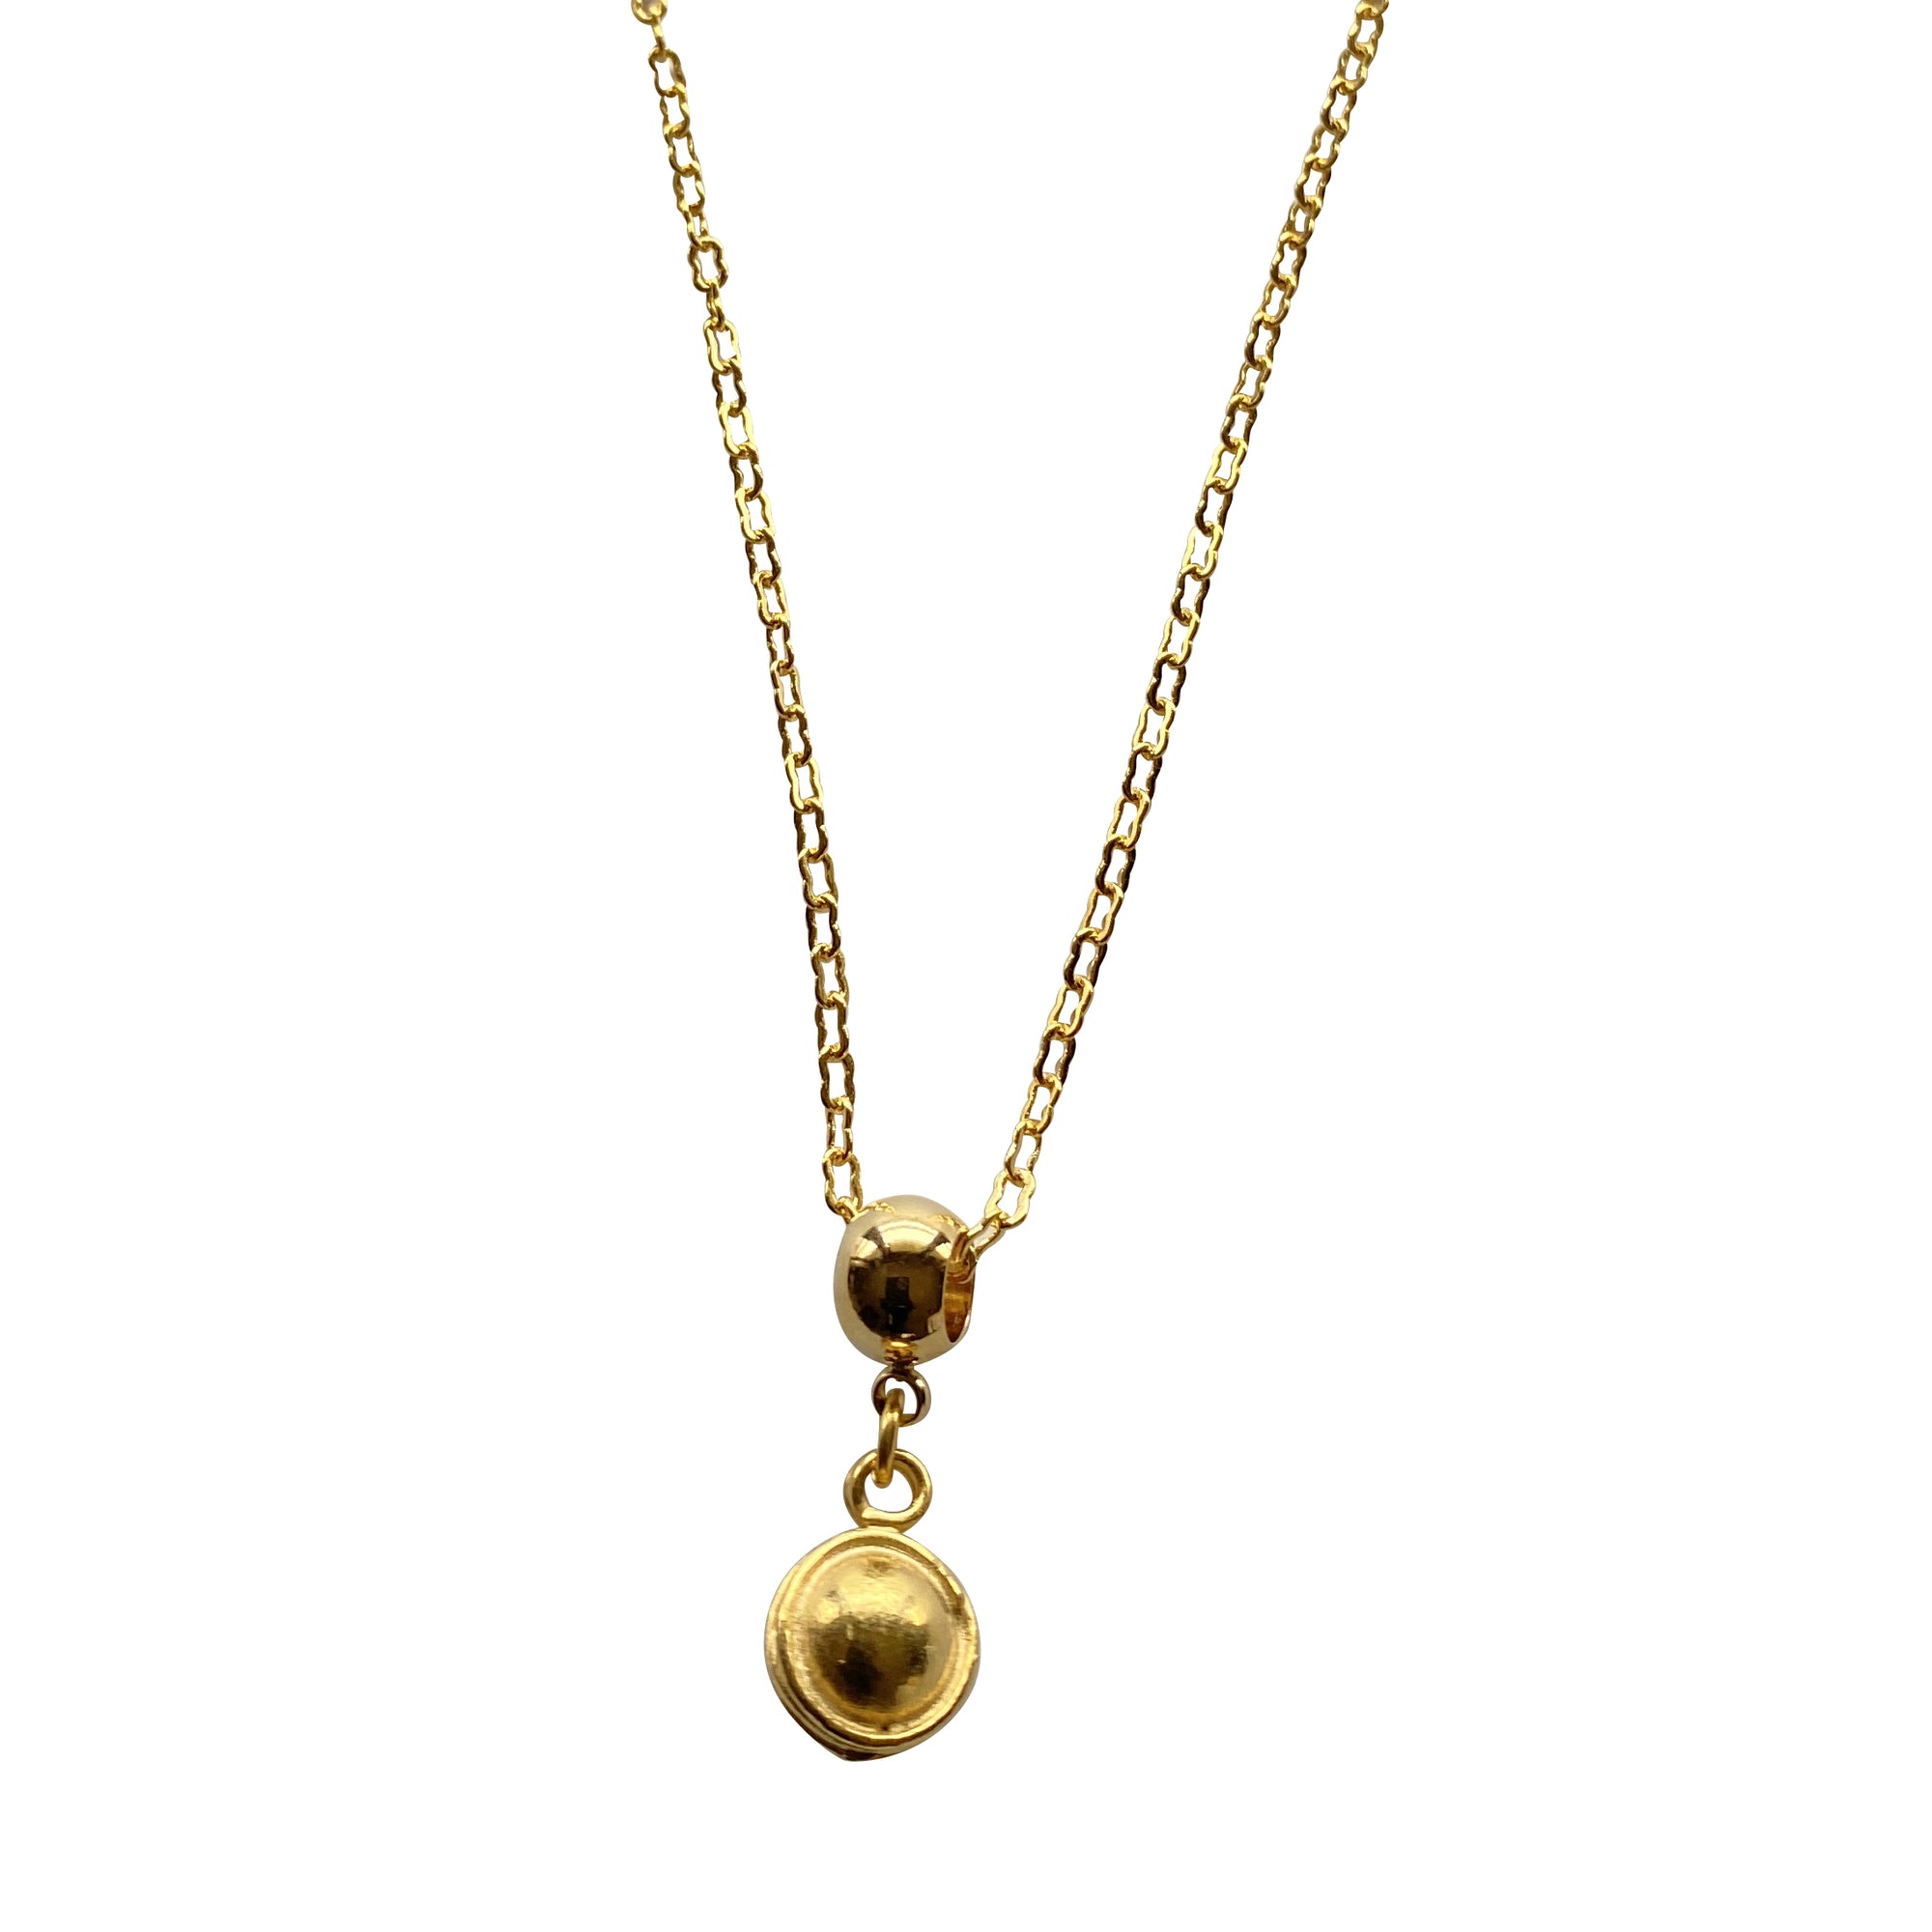 Gold Globe Pendant Necklace with Gold Link Chain